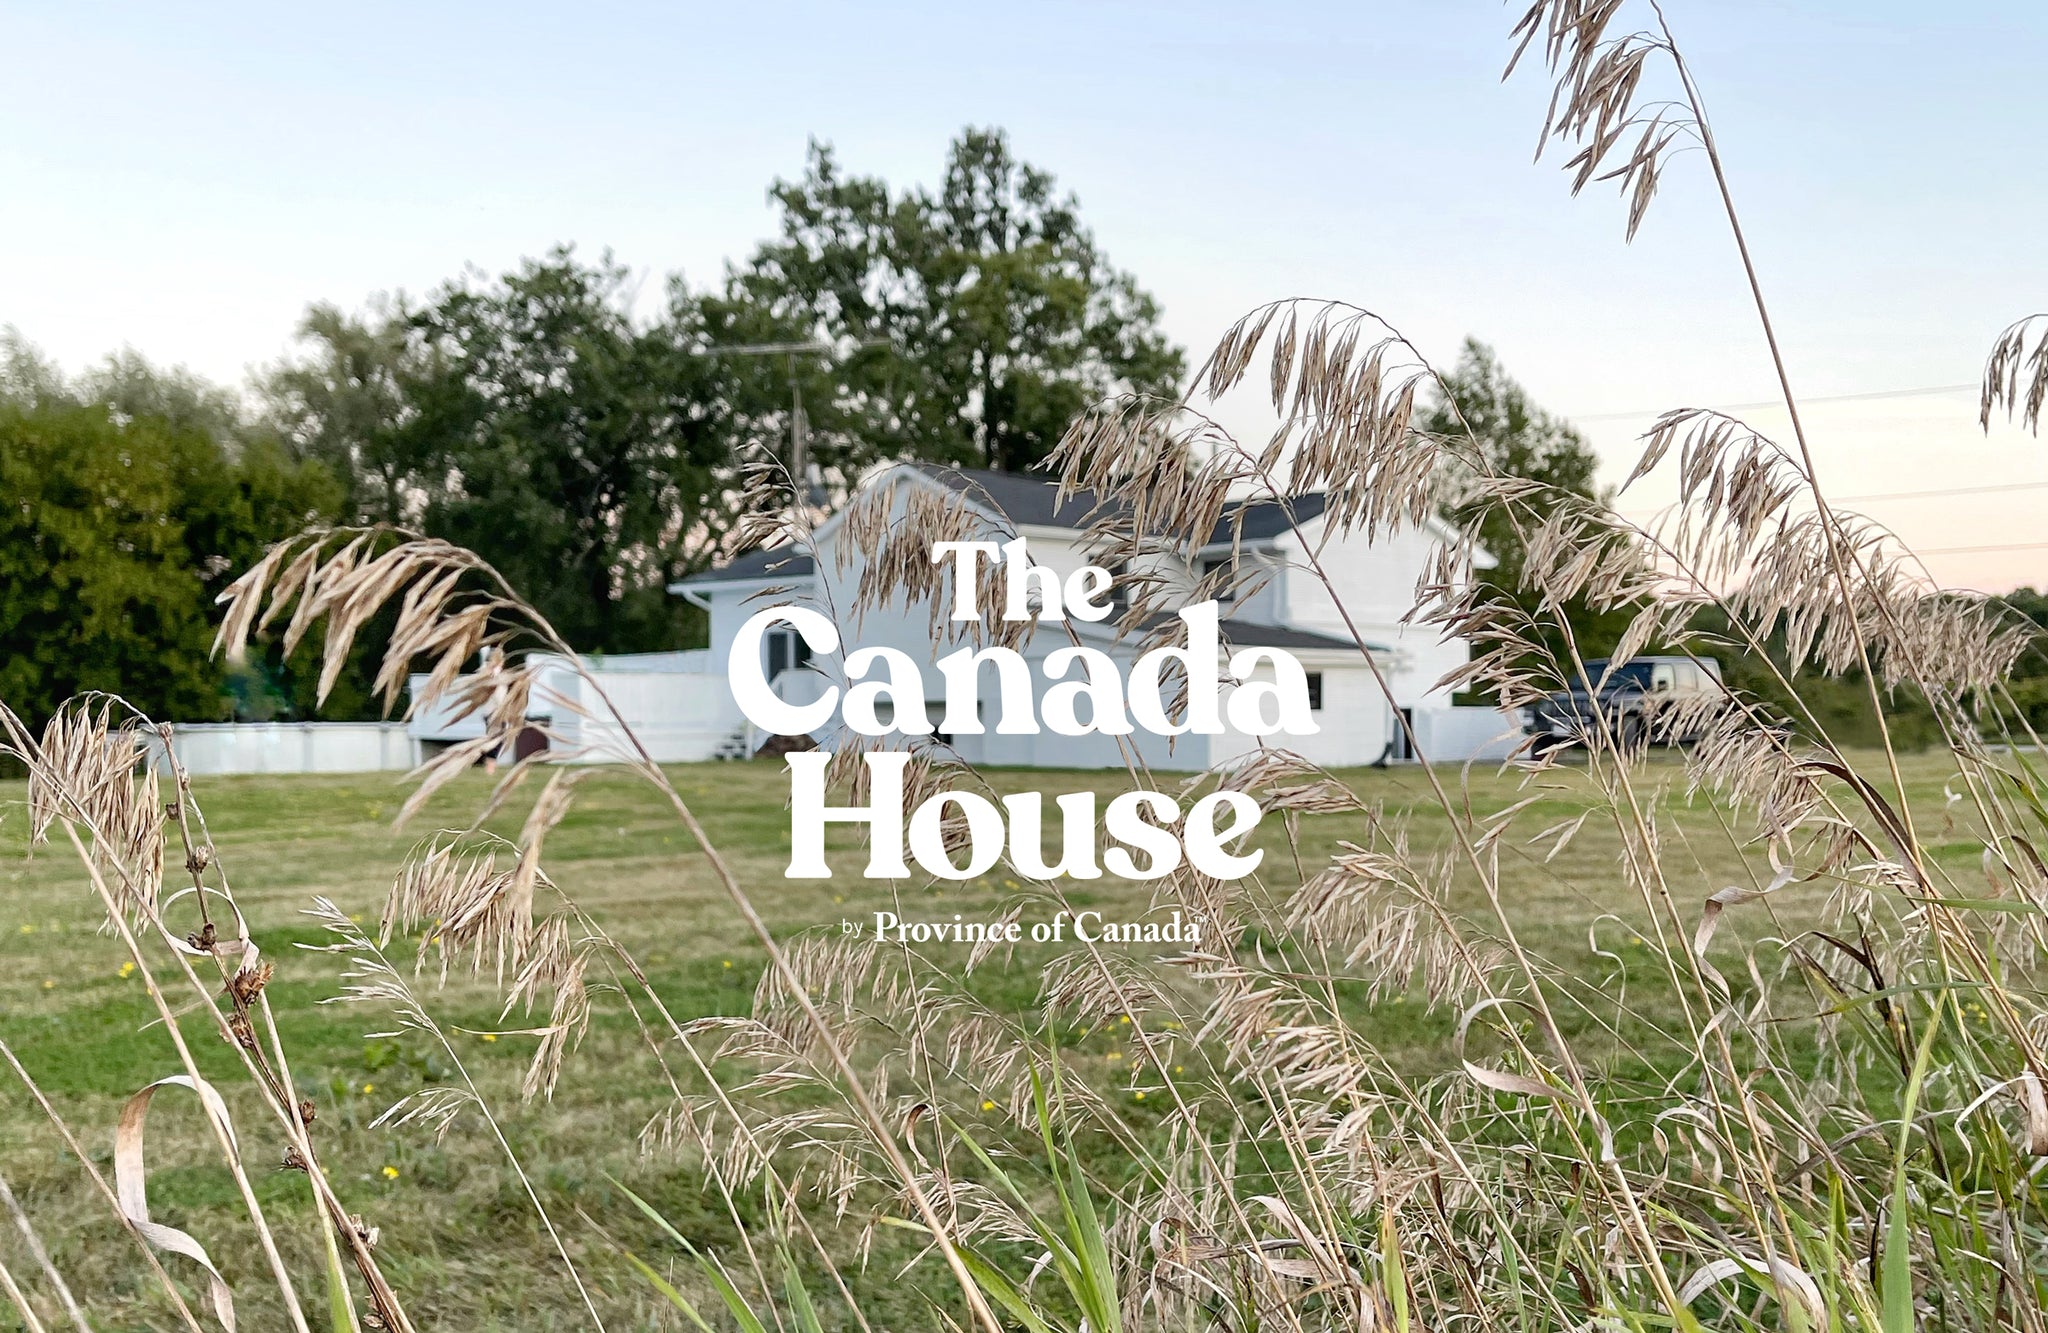 The Canada House by Province of Canada